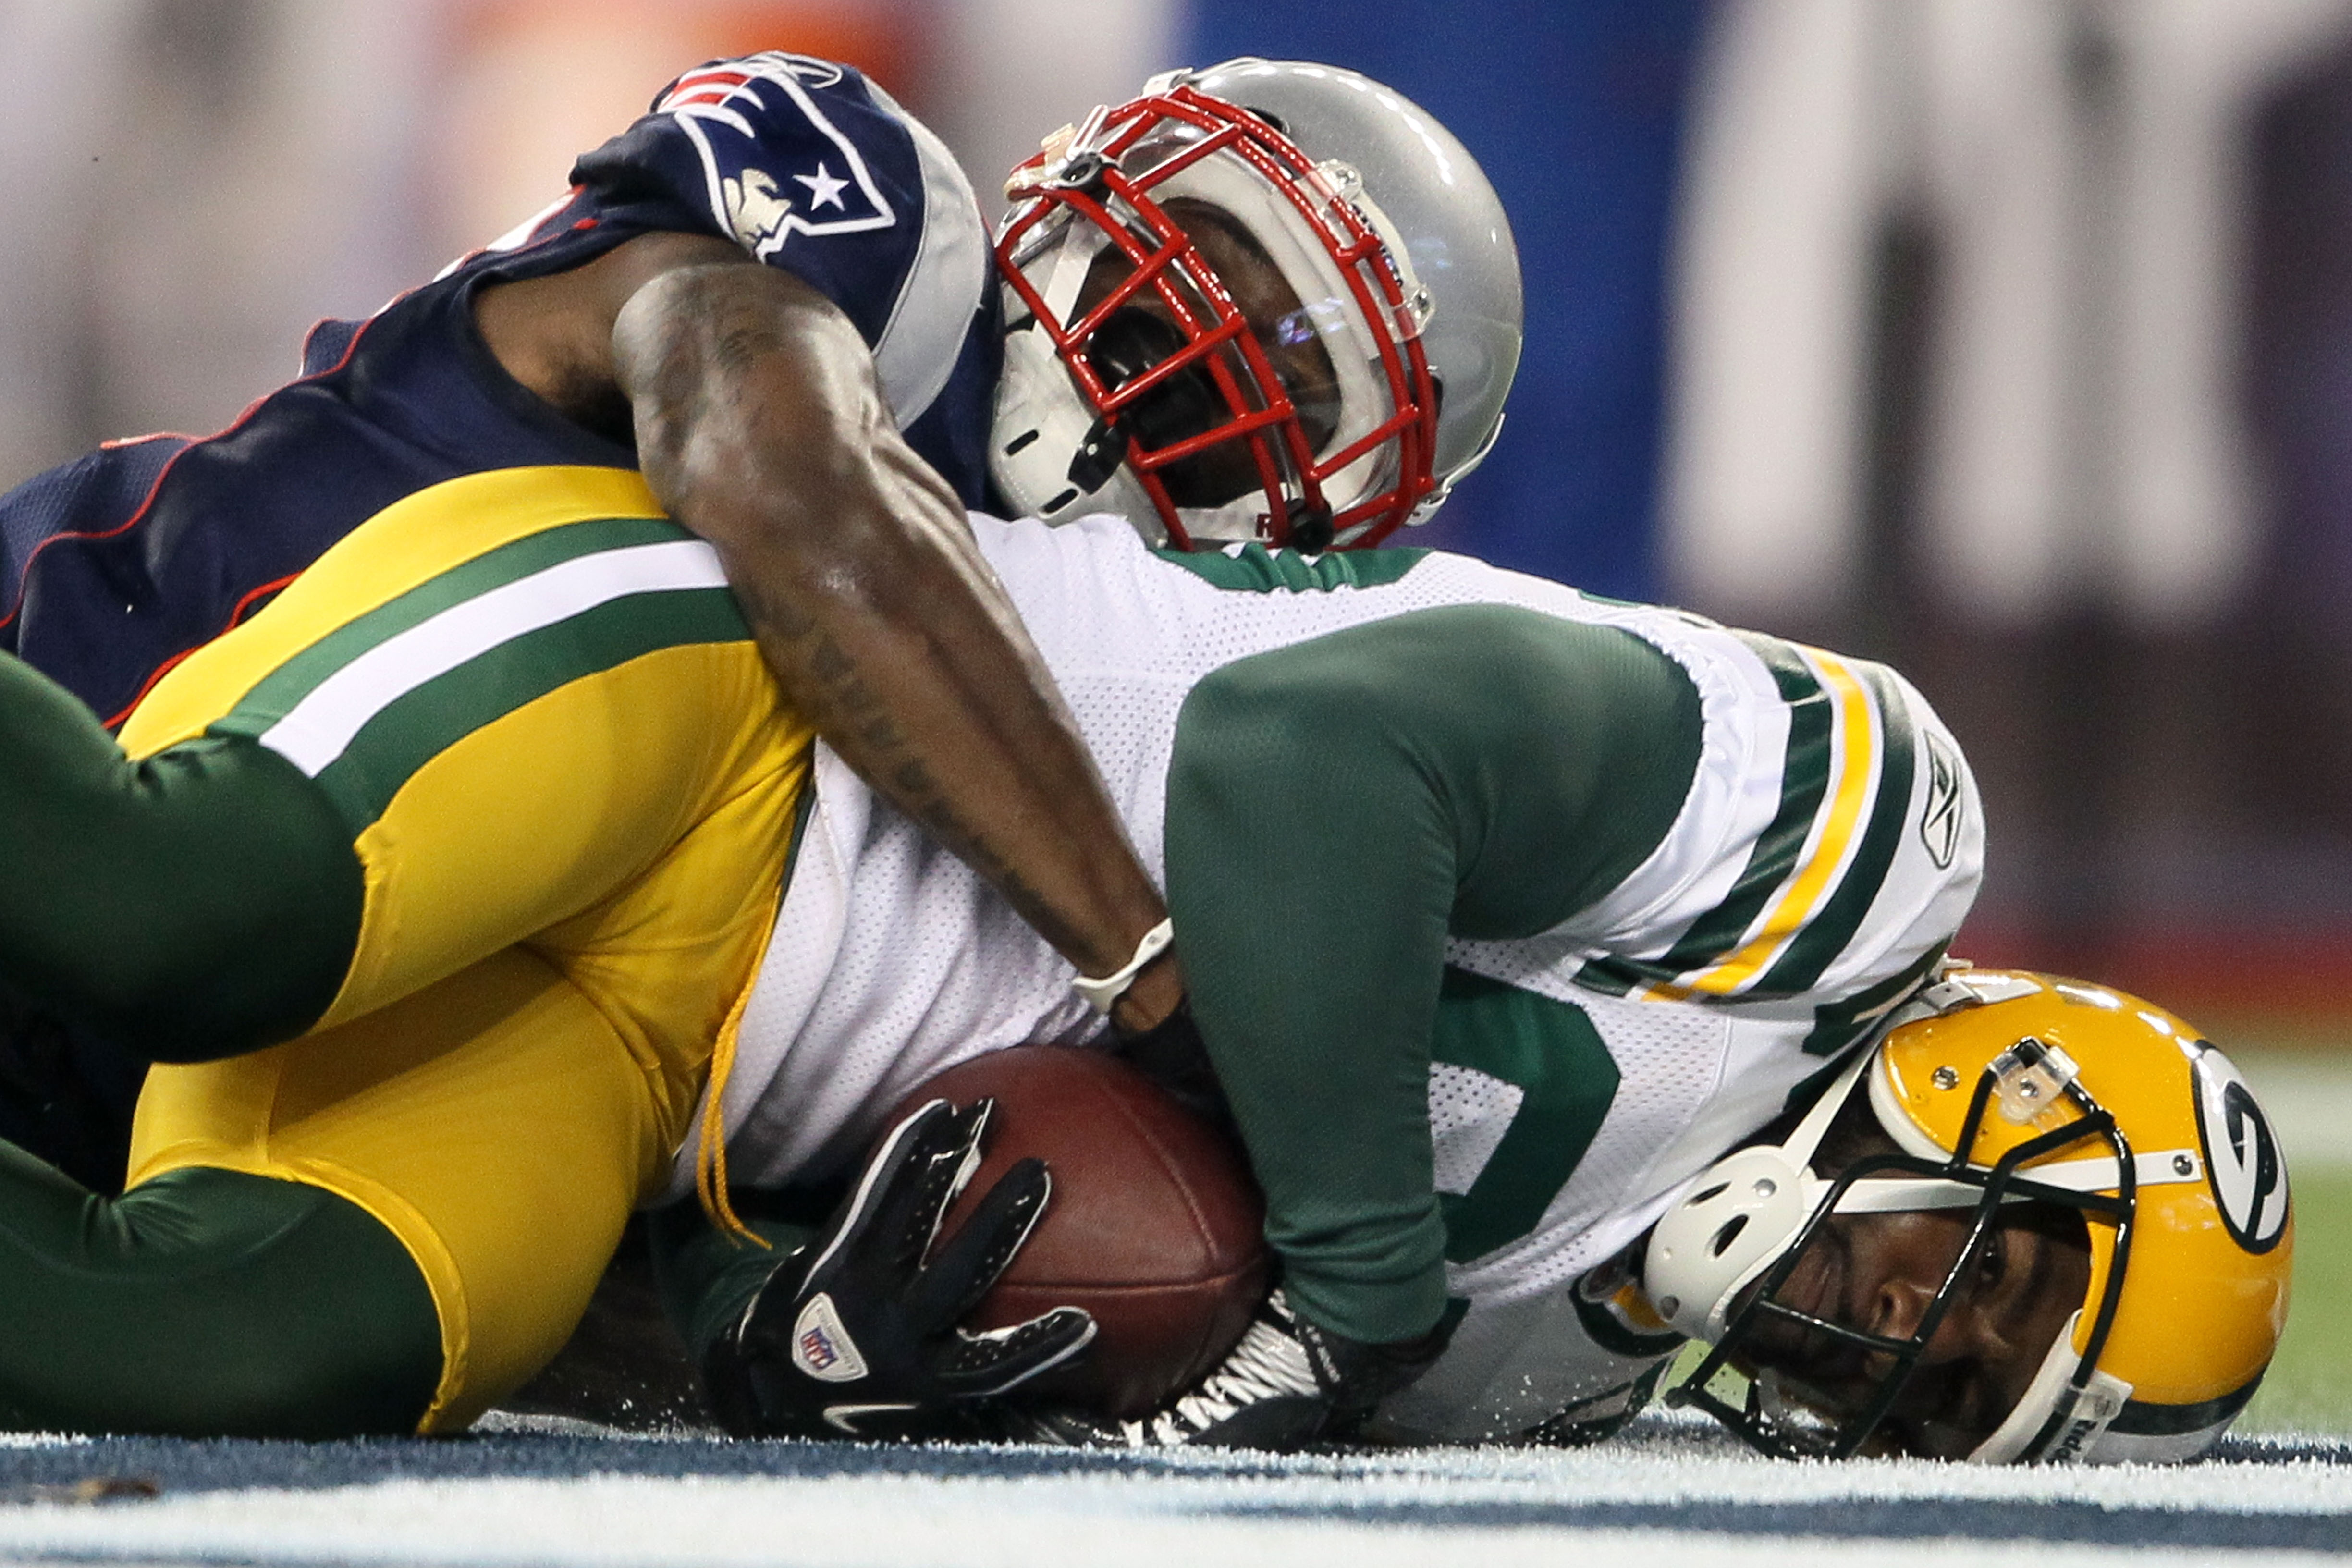 FOXBORO, MA - DECEMBER 19:  Wide receiver Greg Jennings #85 of the Green Bay Packers scores a touchdown against the New England Patriots during the second quarter of the game at Gillette Stadium on December 19, 2010 in Foxboro, Massachusetts.  (Photo by E